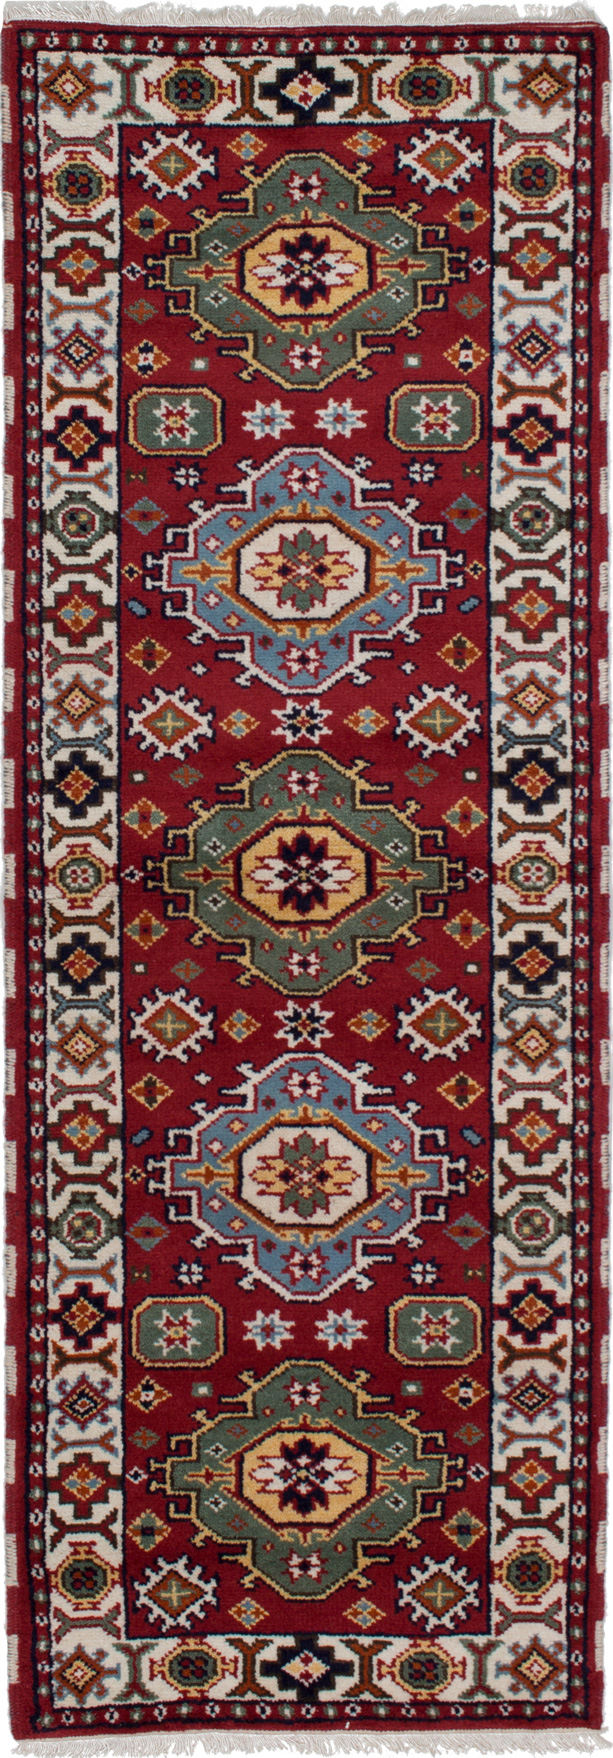 Hand-knotted Royal Kazak Red Wool Rug 2'10" x 8'2"  Size: 2'10" x 8'2"  